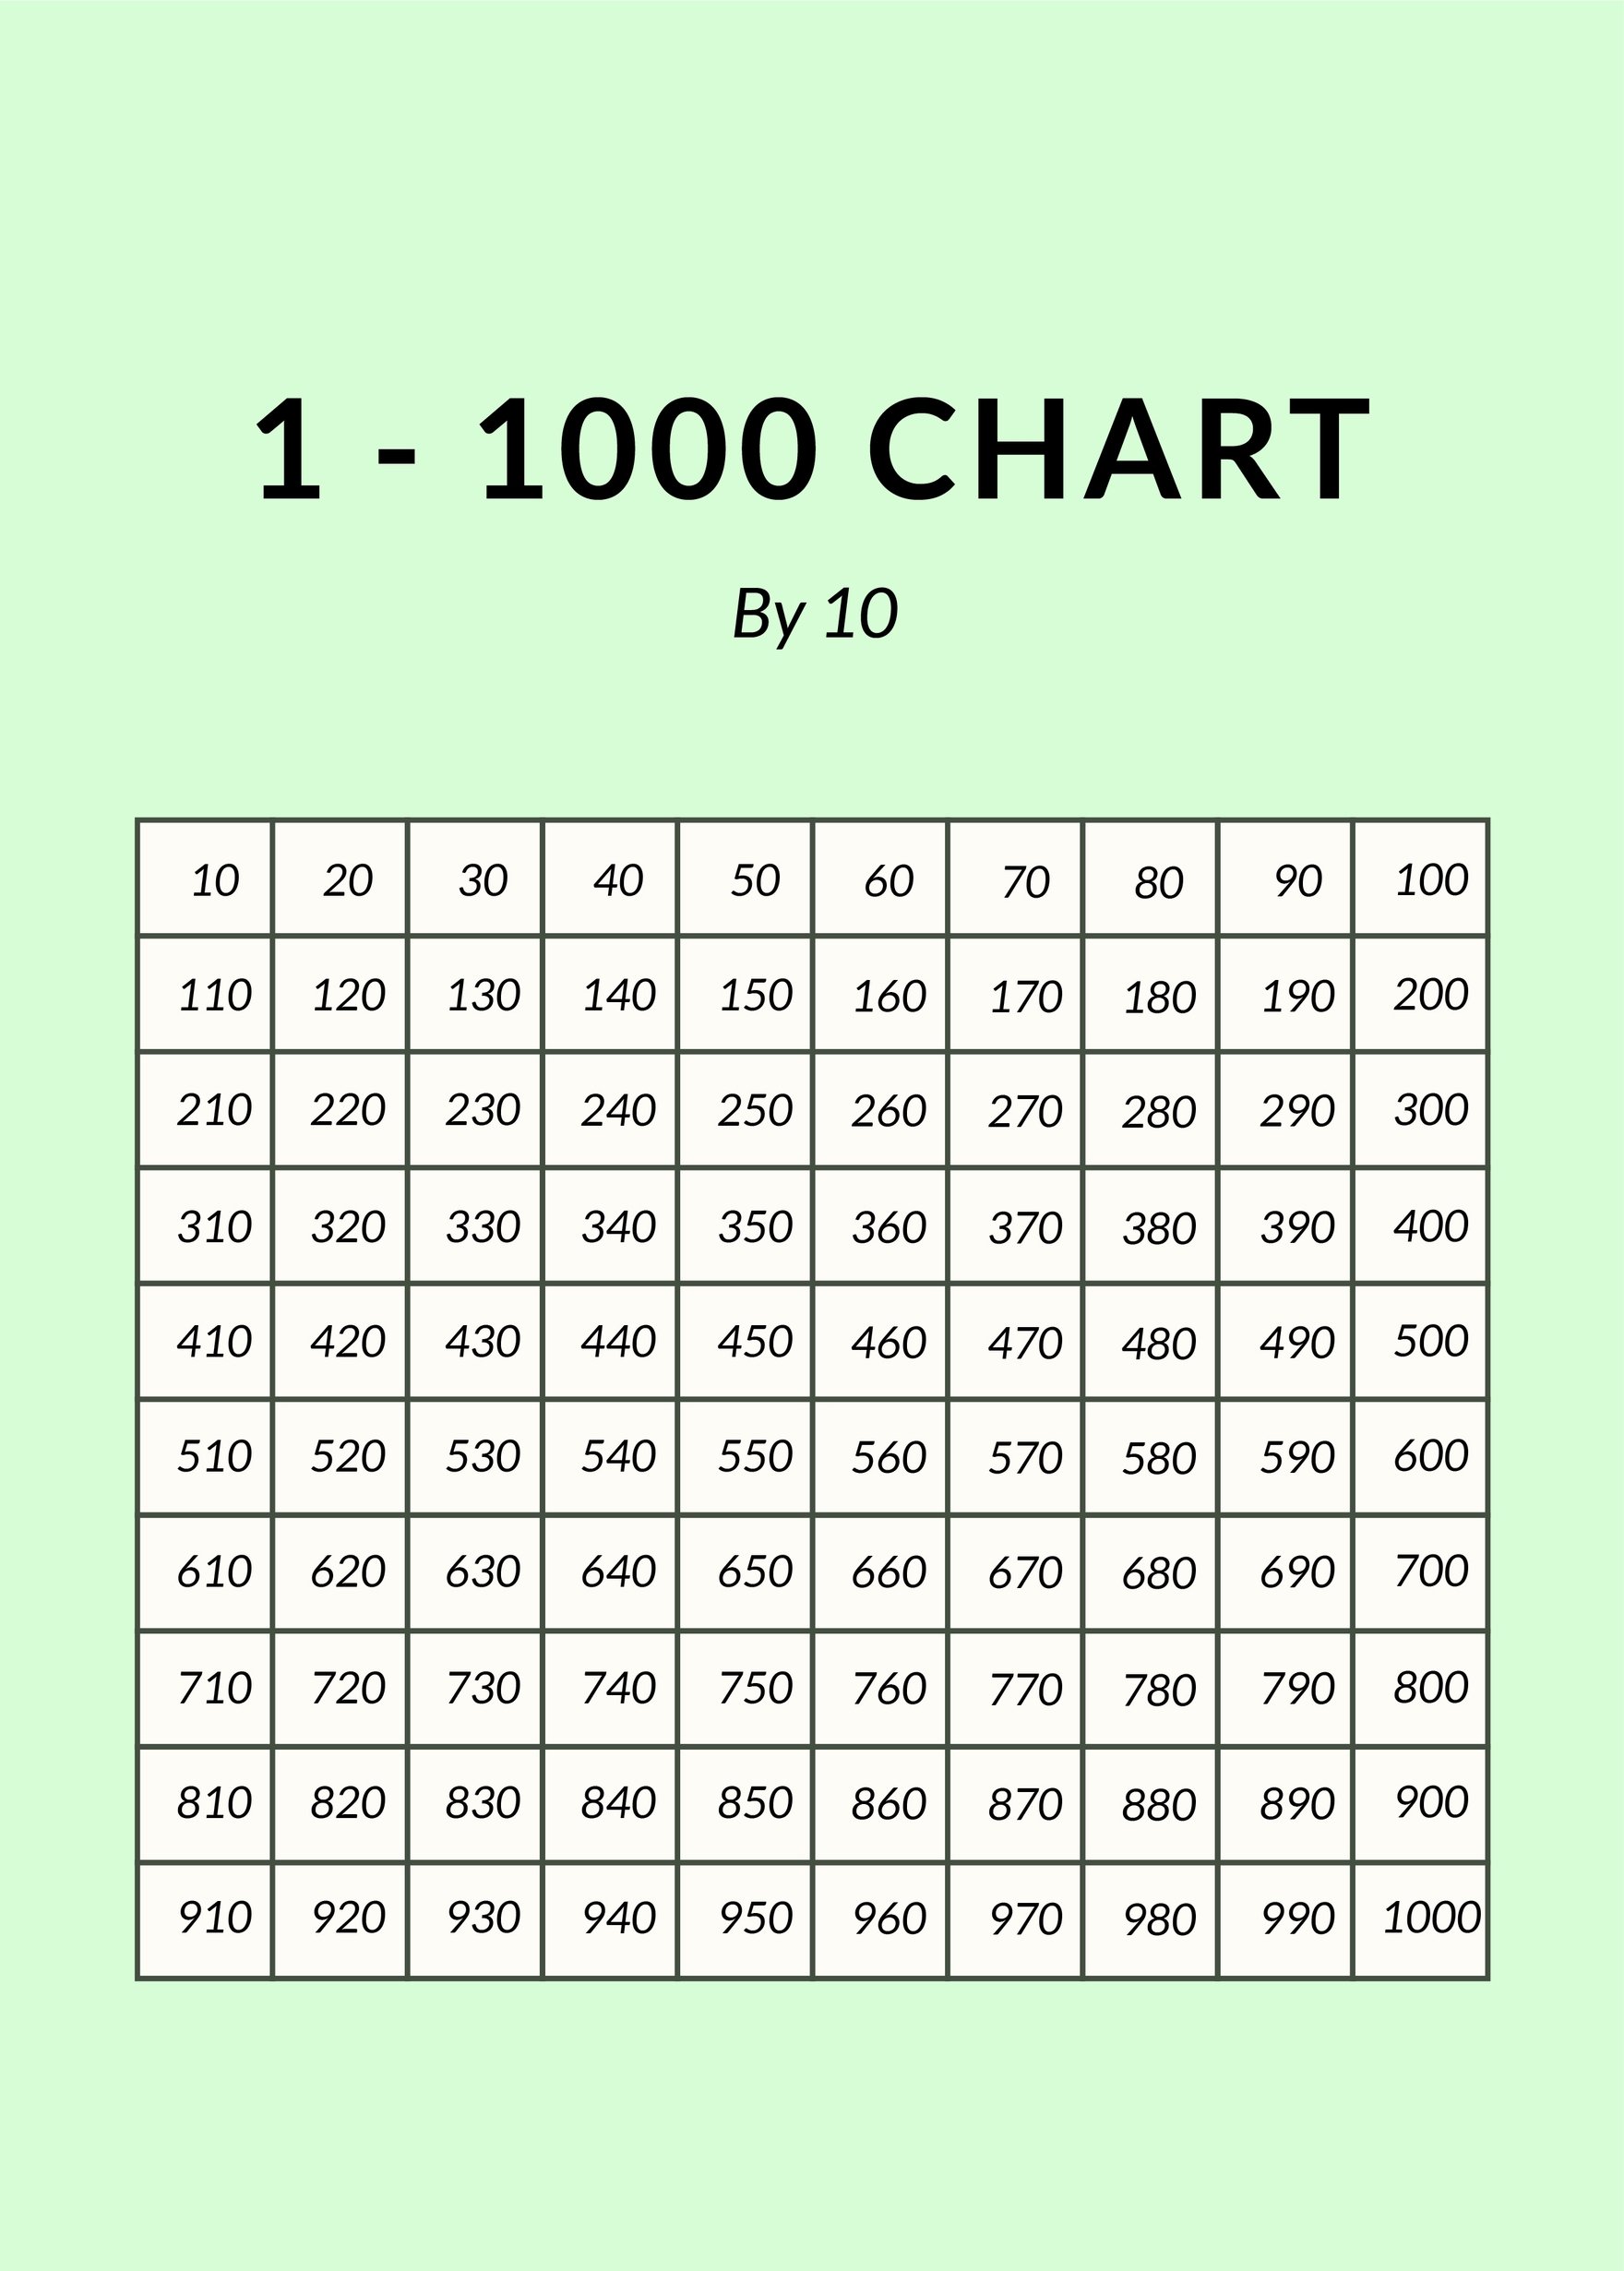 1 - 1000 Number Chart